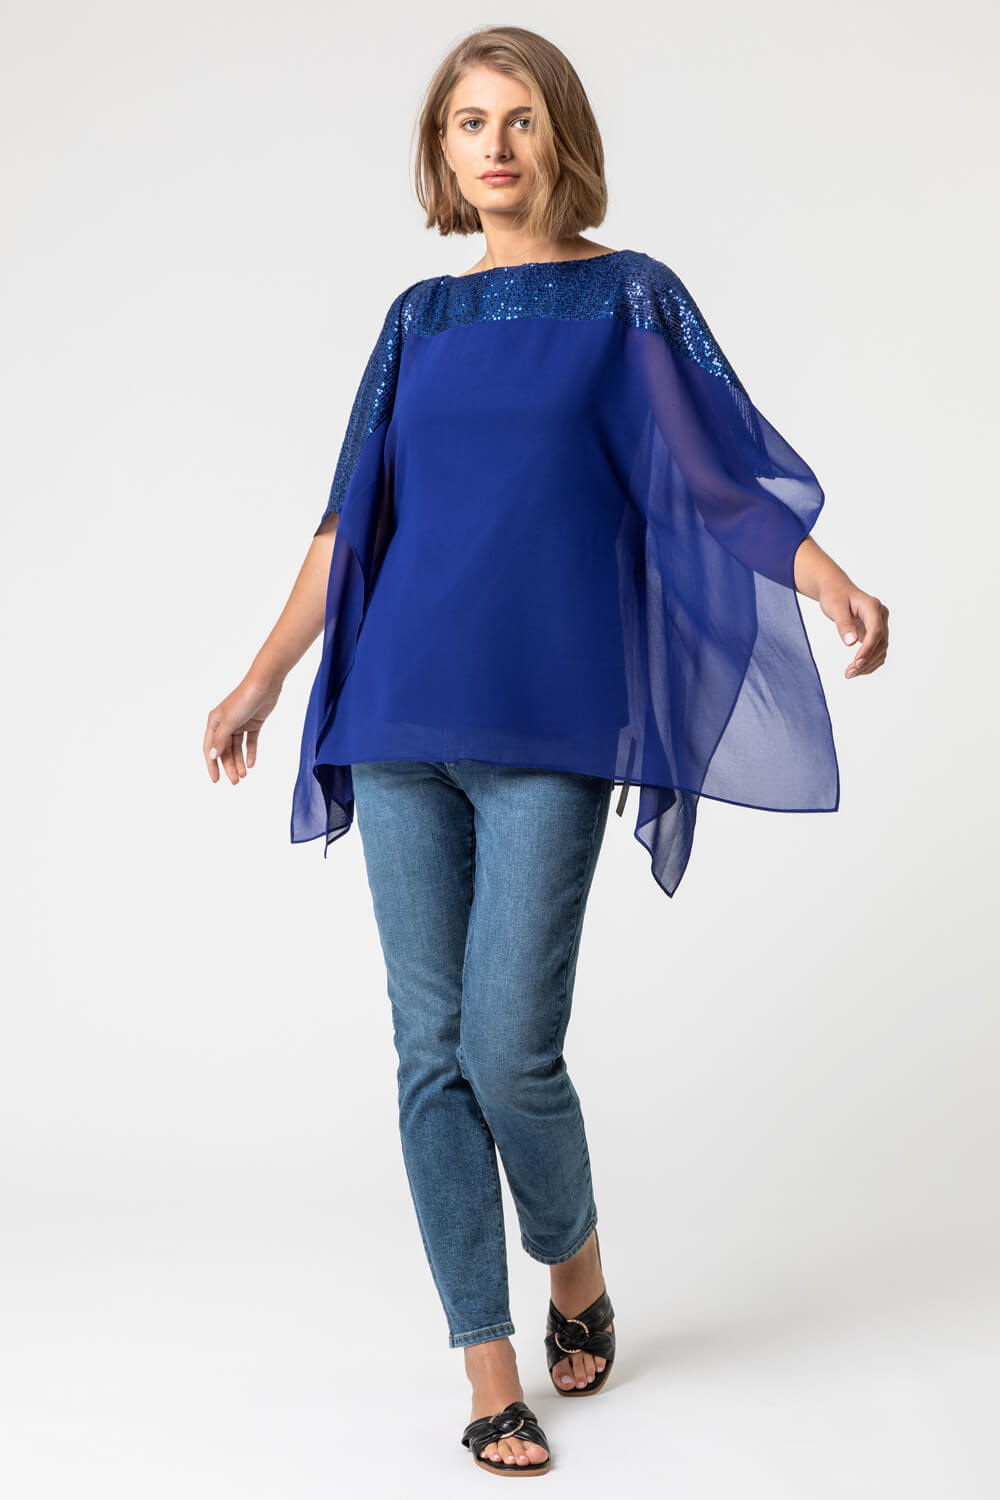 Royal Blue Sequin Embellished Chiffon Overlay Top, Image 3 of 4